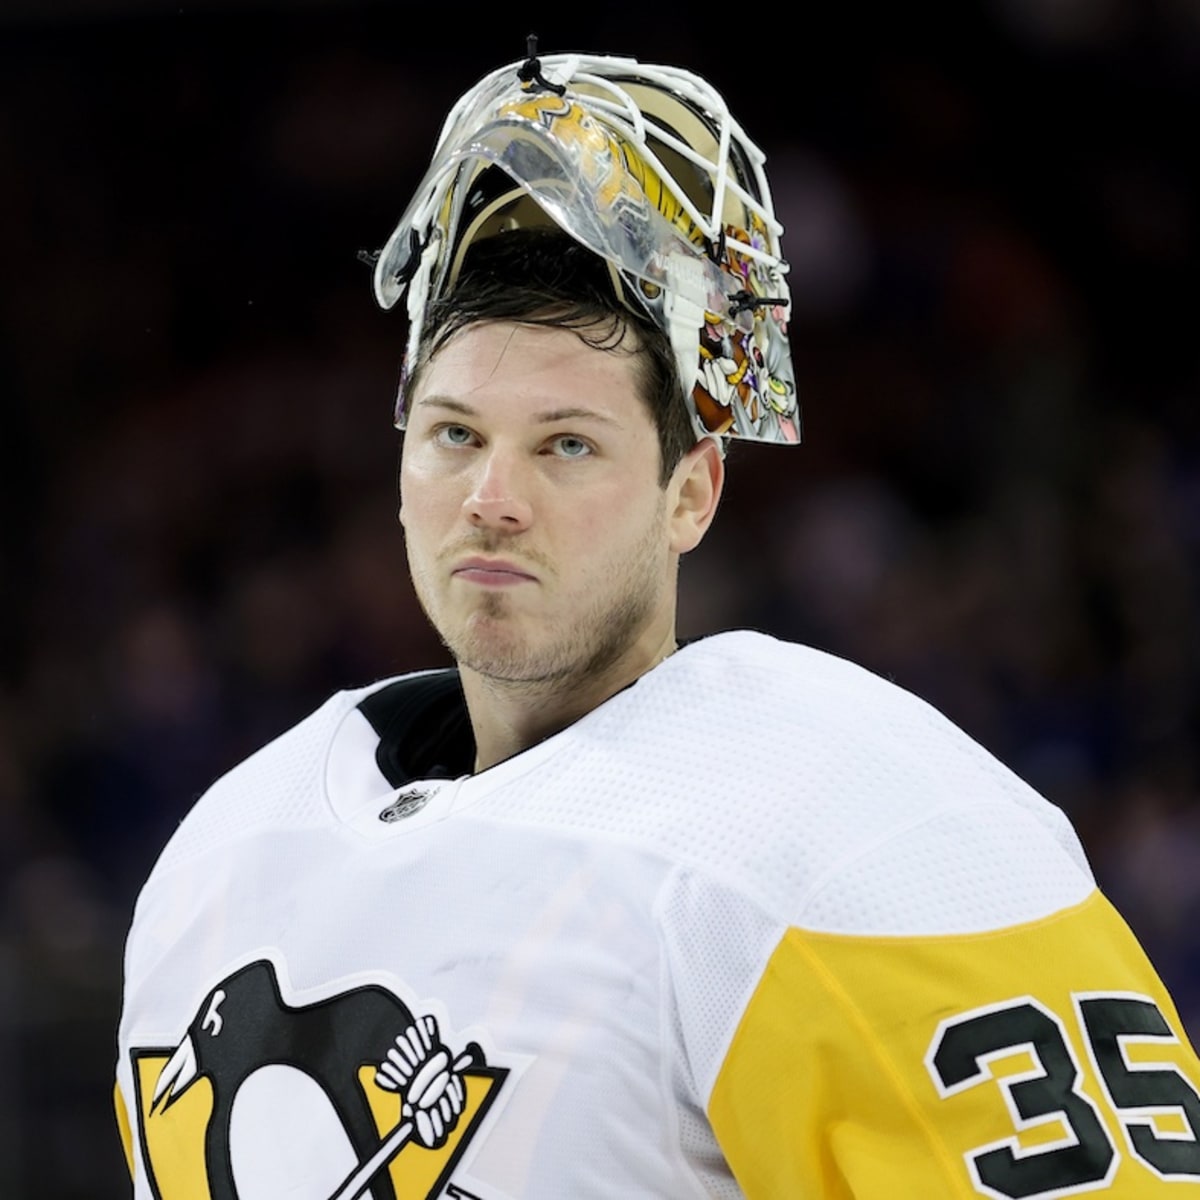 Penguins' Jarry out until after All-Star break due to injury